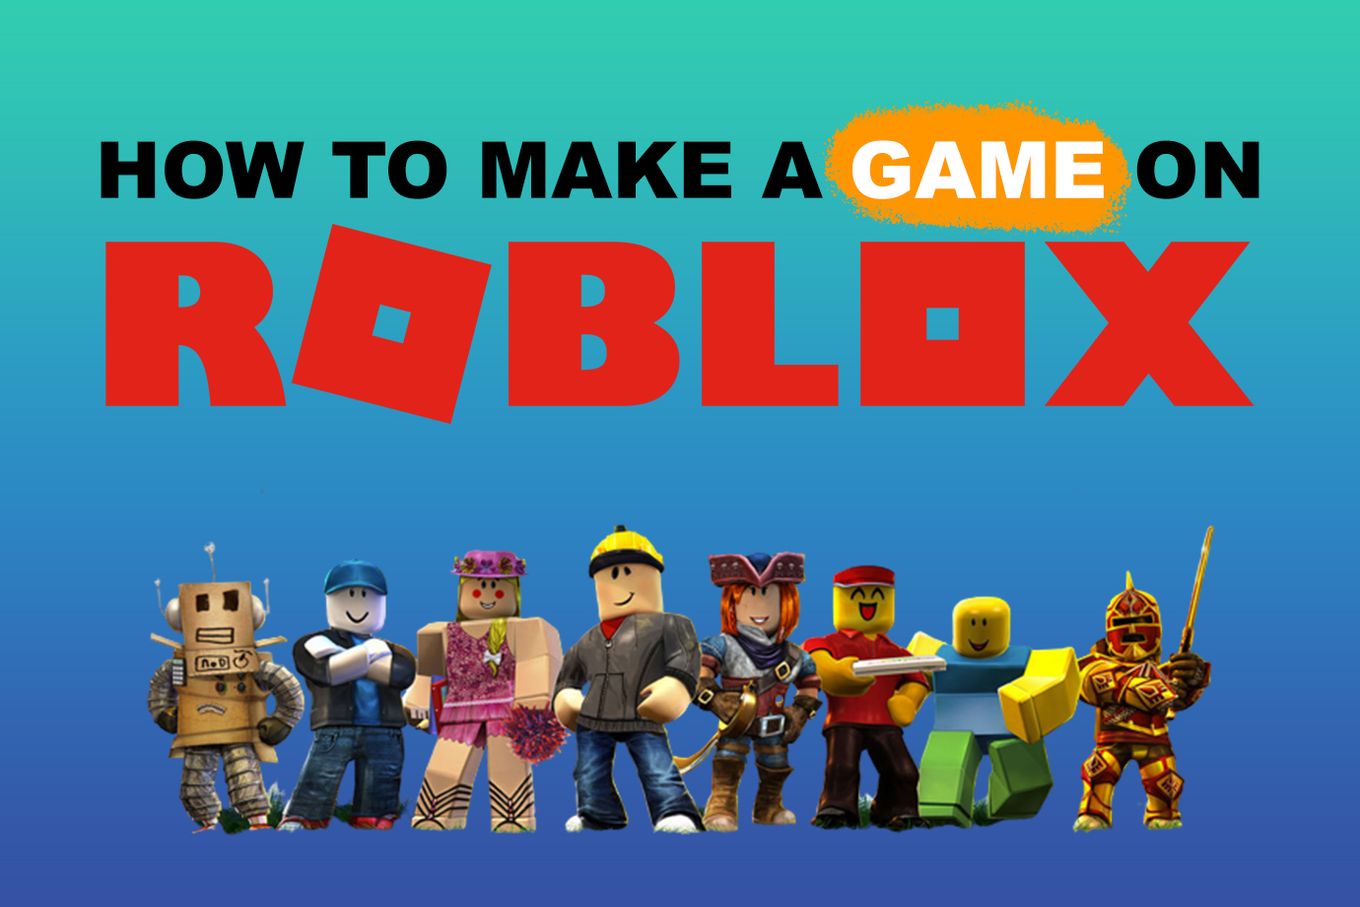 How to make a game on Roblox